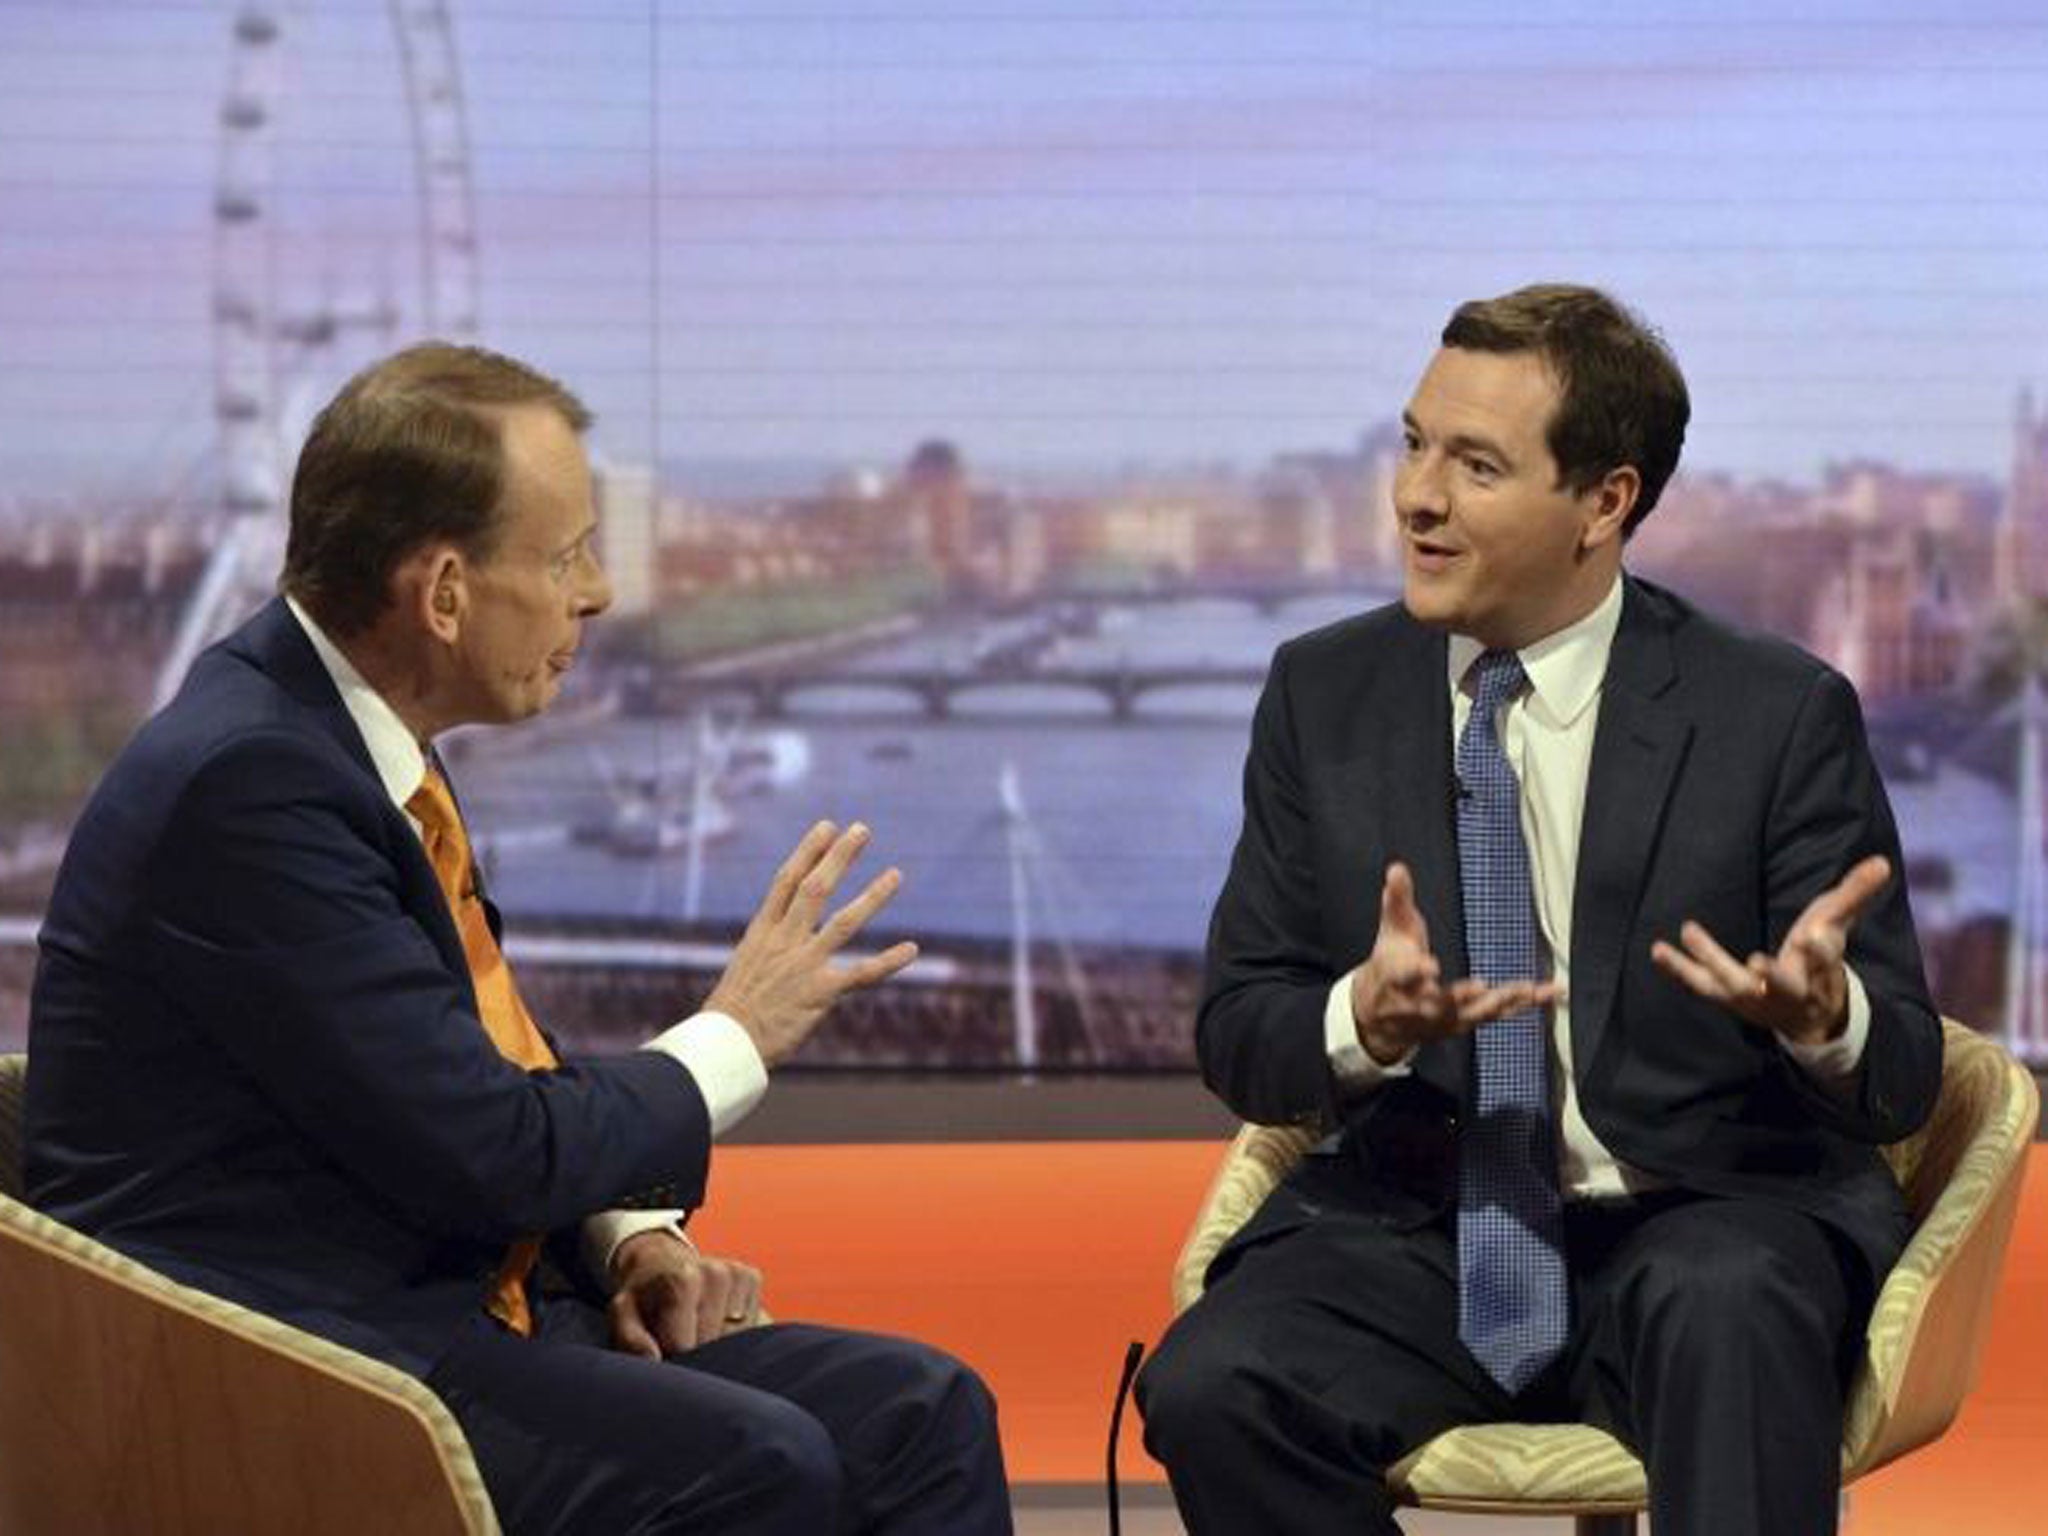 Chancellor George Osborne tells BBC's Andrew Marr show the Government will not return to issue of military action in Syria, even if there are more chemical weapons attacks